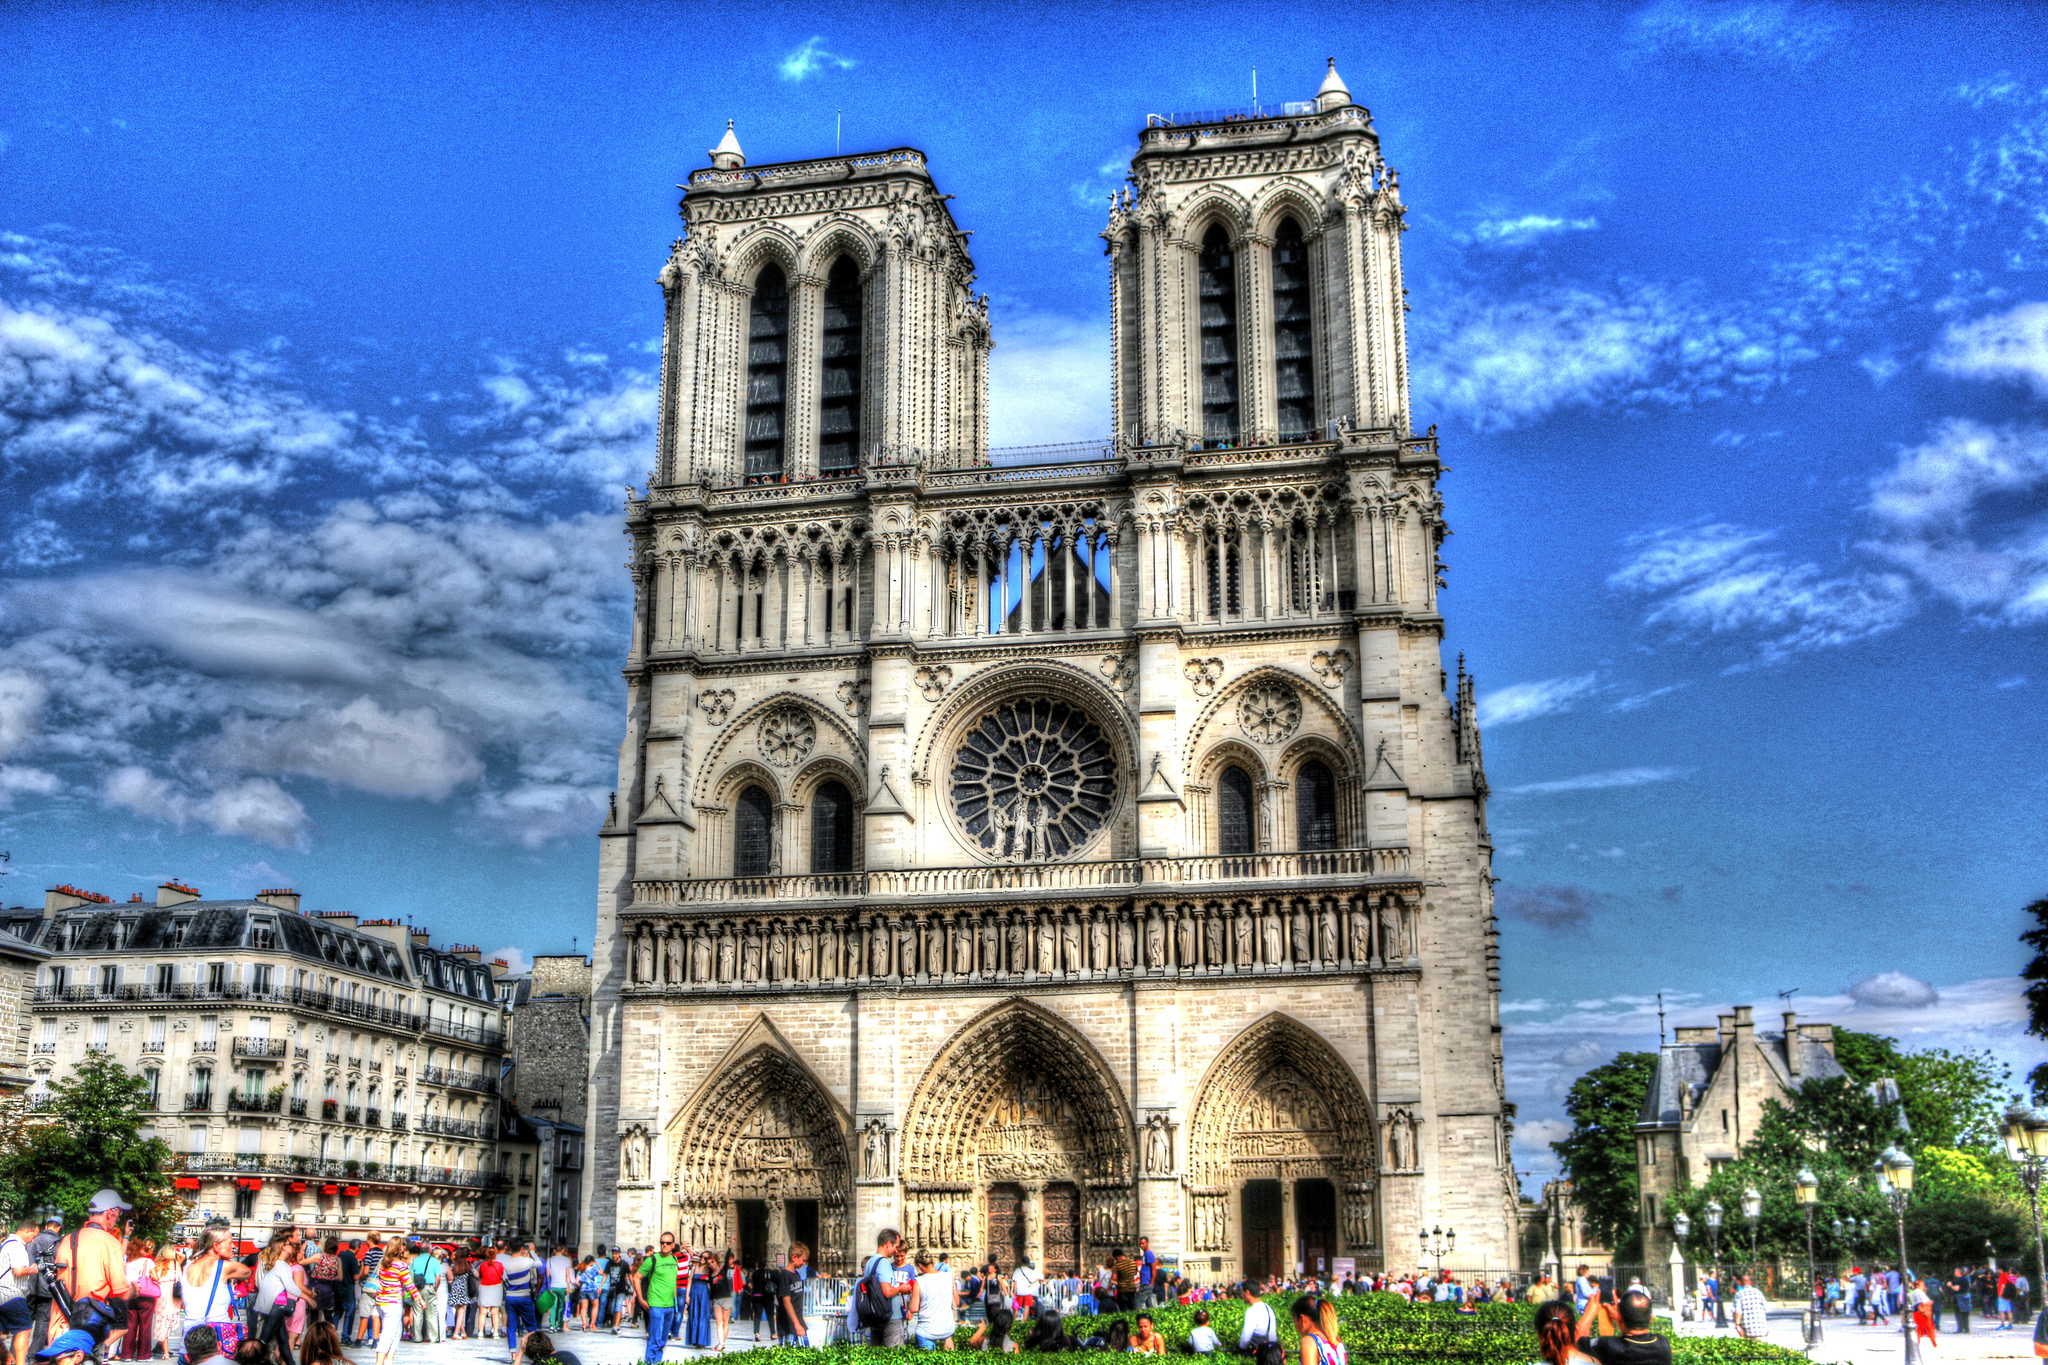 Cathedral Notre Dame is the French Gothic Treasure - YourAmazingPlaces.com